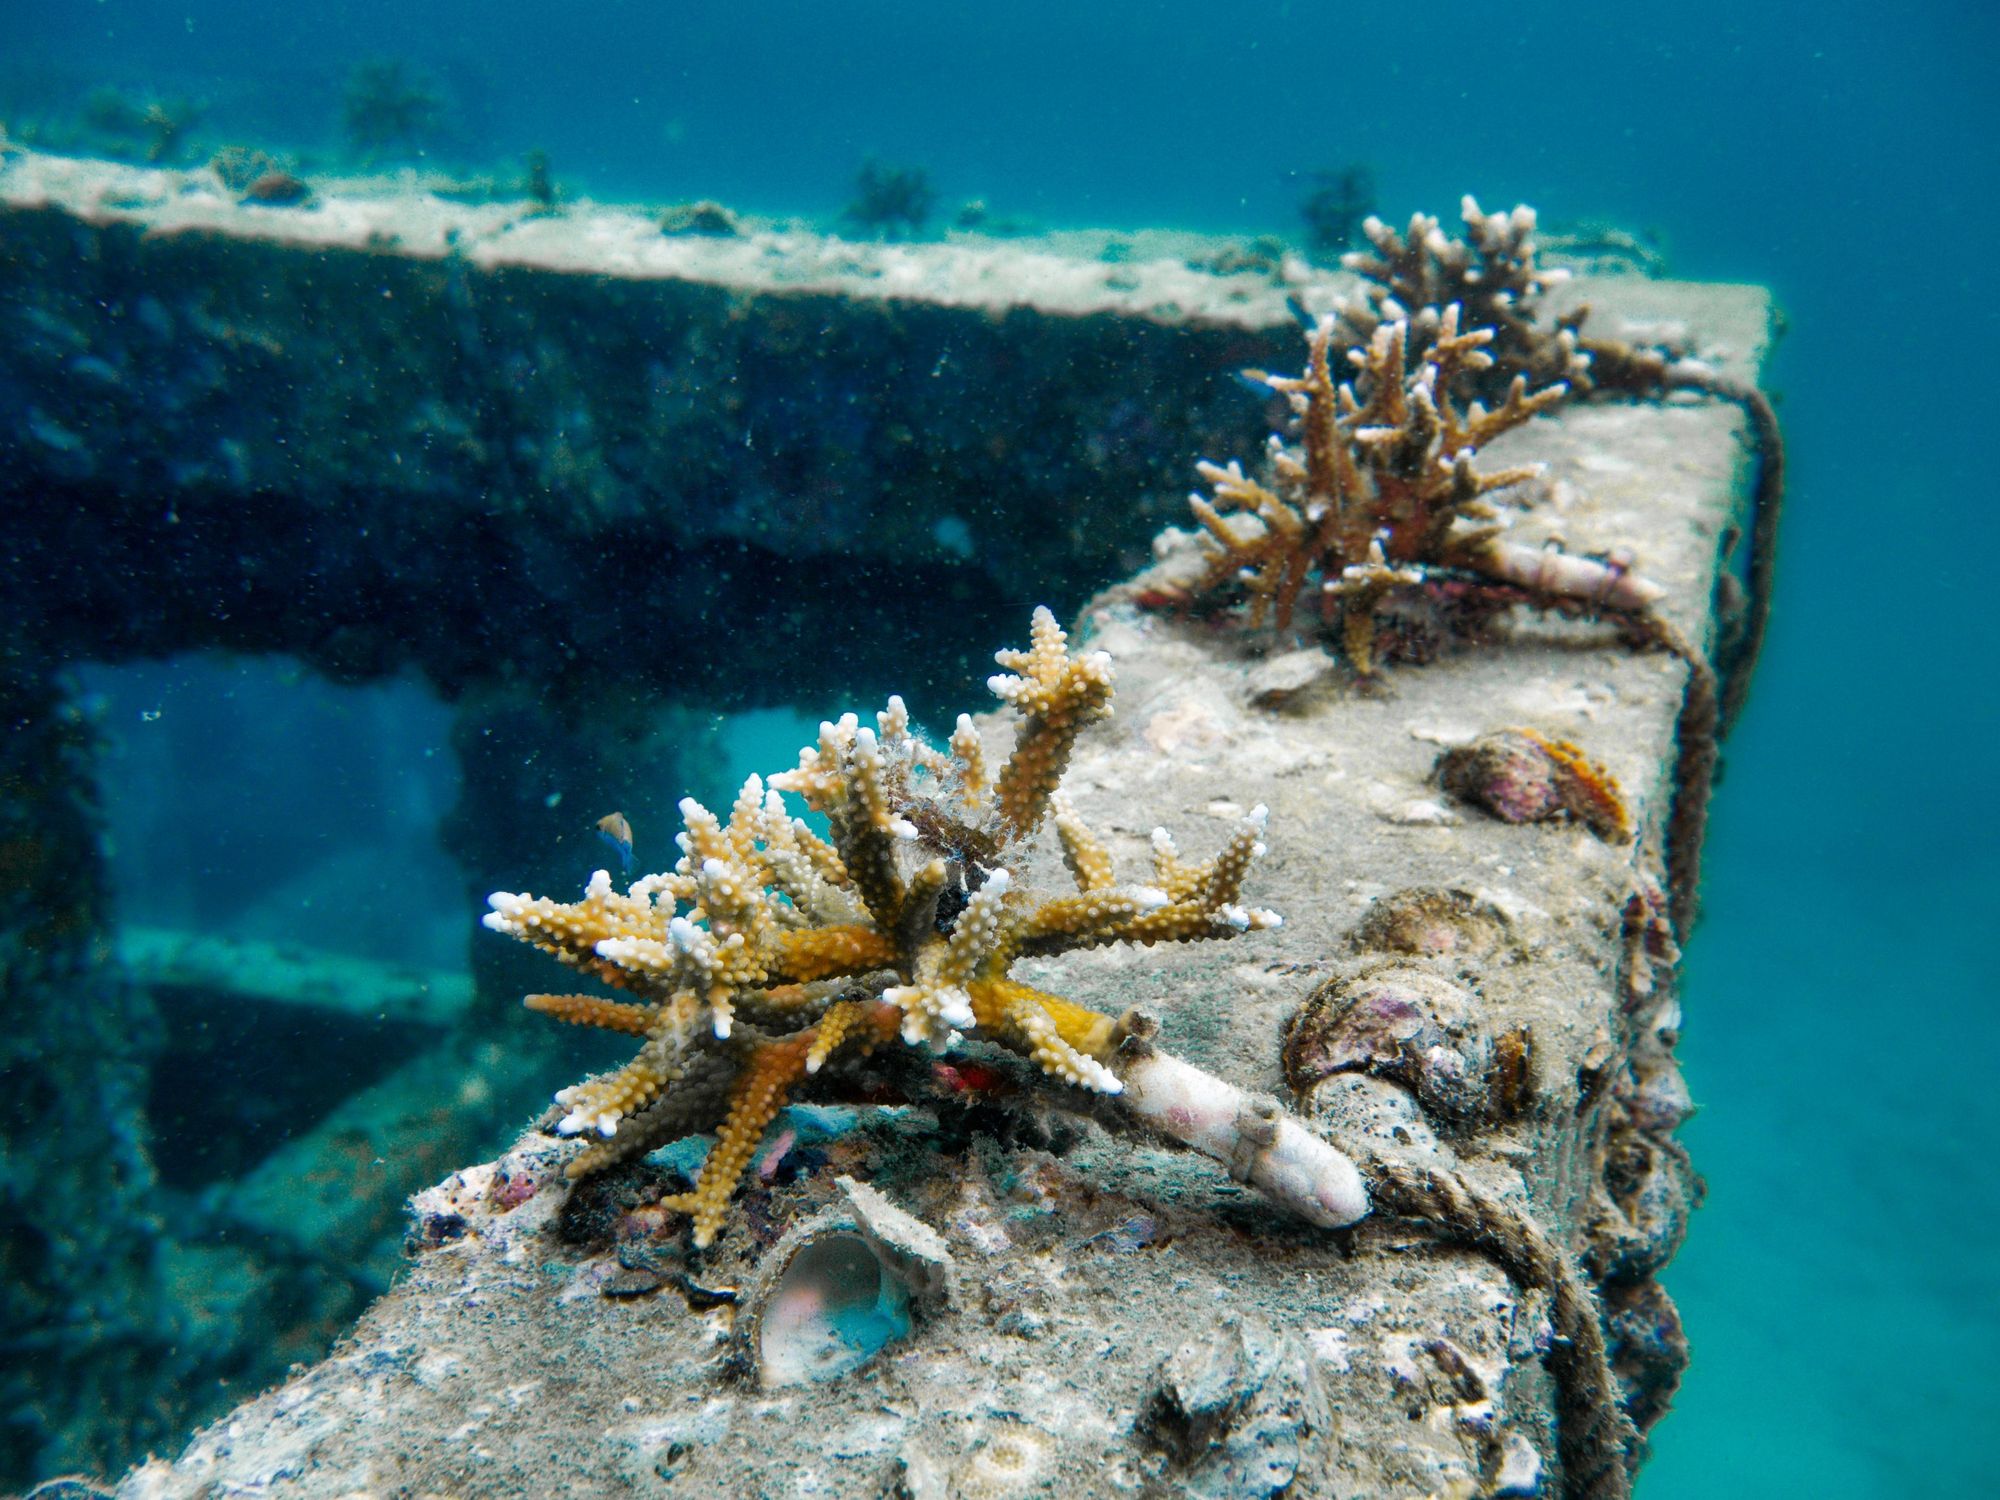 Coral growing on a shipwreck.